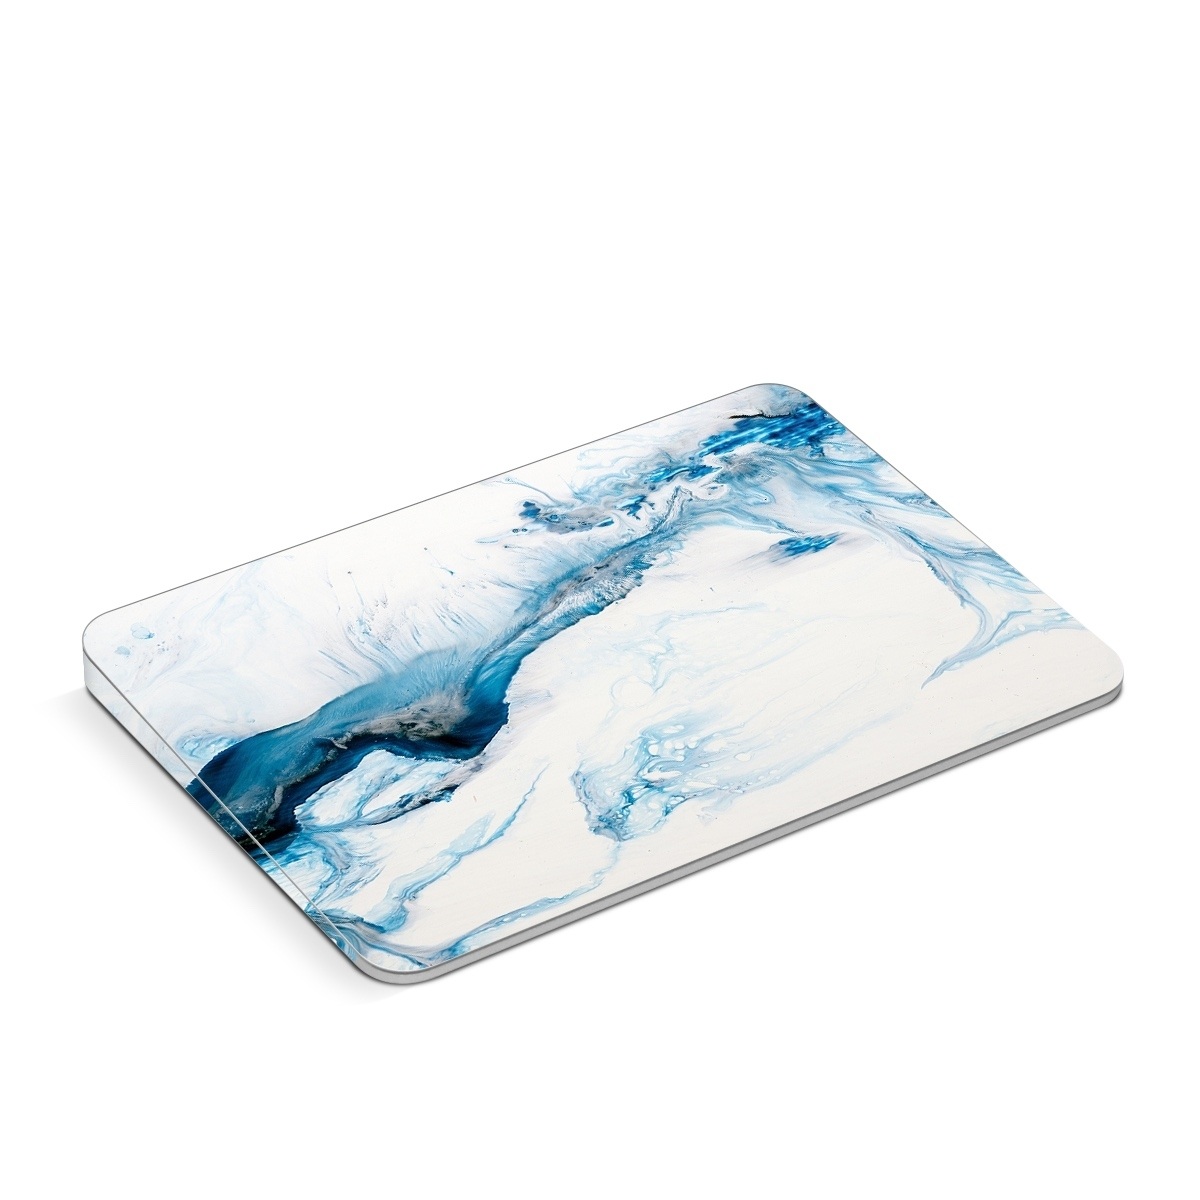 Apple Magic Trackpad 1 Skin design of Glacial landform, Blue, Water, Glacier, Sky, Arctic, Ice cap, Watercolor paint, Drawing, Art with white, blue, black colors